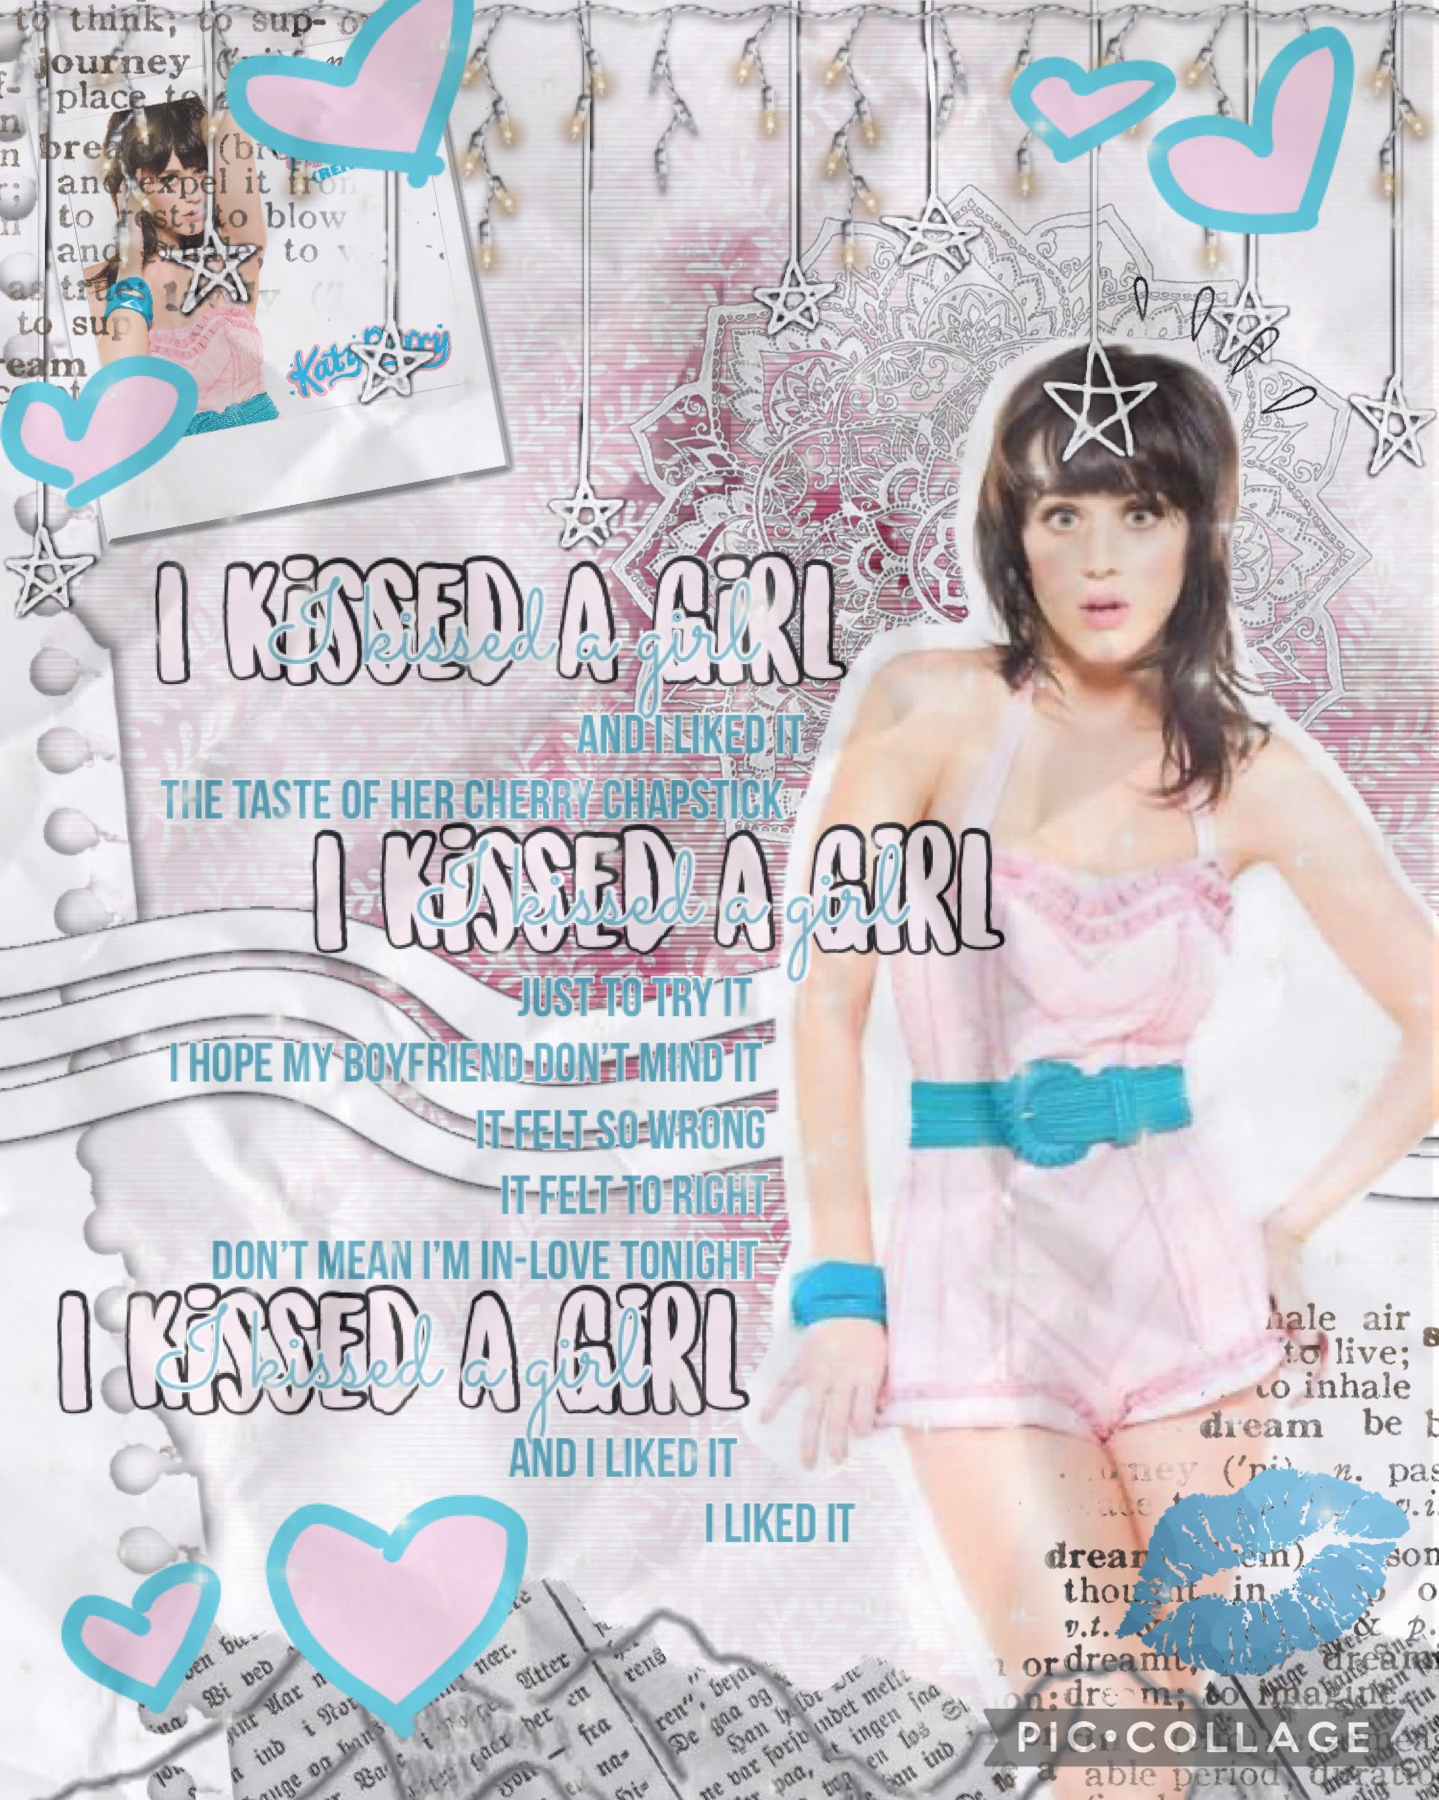 💖 TAP 💖
💖 Katy Perry collage! 💖
💖 lyrics from her song ‘I Kissed A Girl’ 💖
💖 my entry to @COLLAGE_SHOWDOWN 😃 💖
💖 QOTD- first celebrity crush? 💖
💖 AOTD- katy perry and a small one on Ariana Grande 🤣 💖